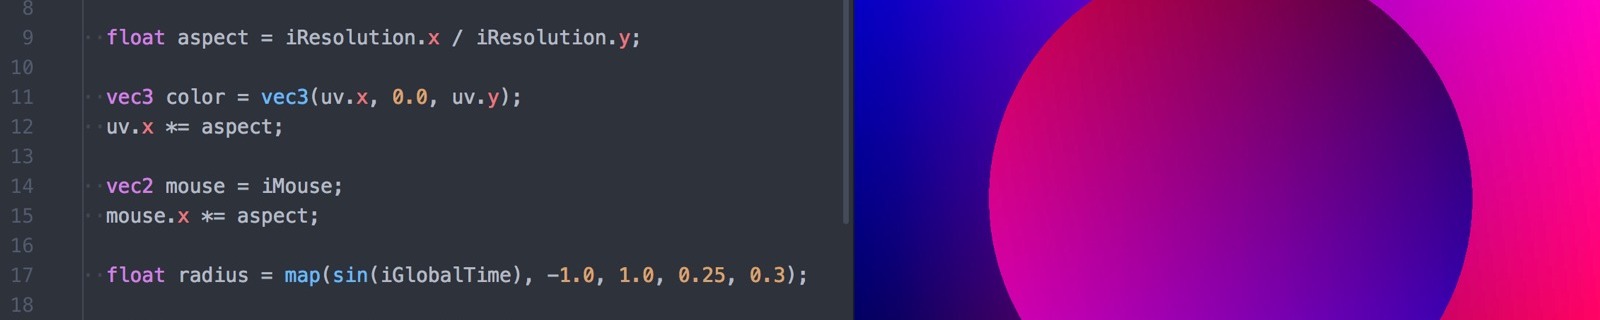 Screenshot of atom-glsl-preview showing code on the left and a rendering of the shader on the right.